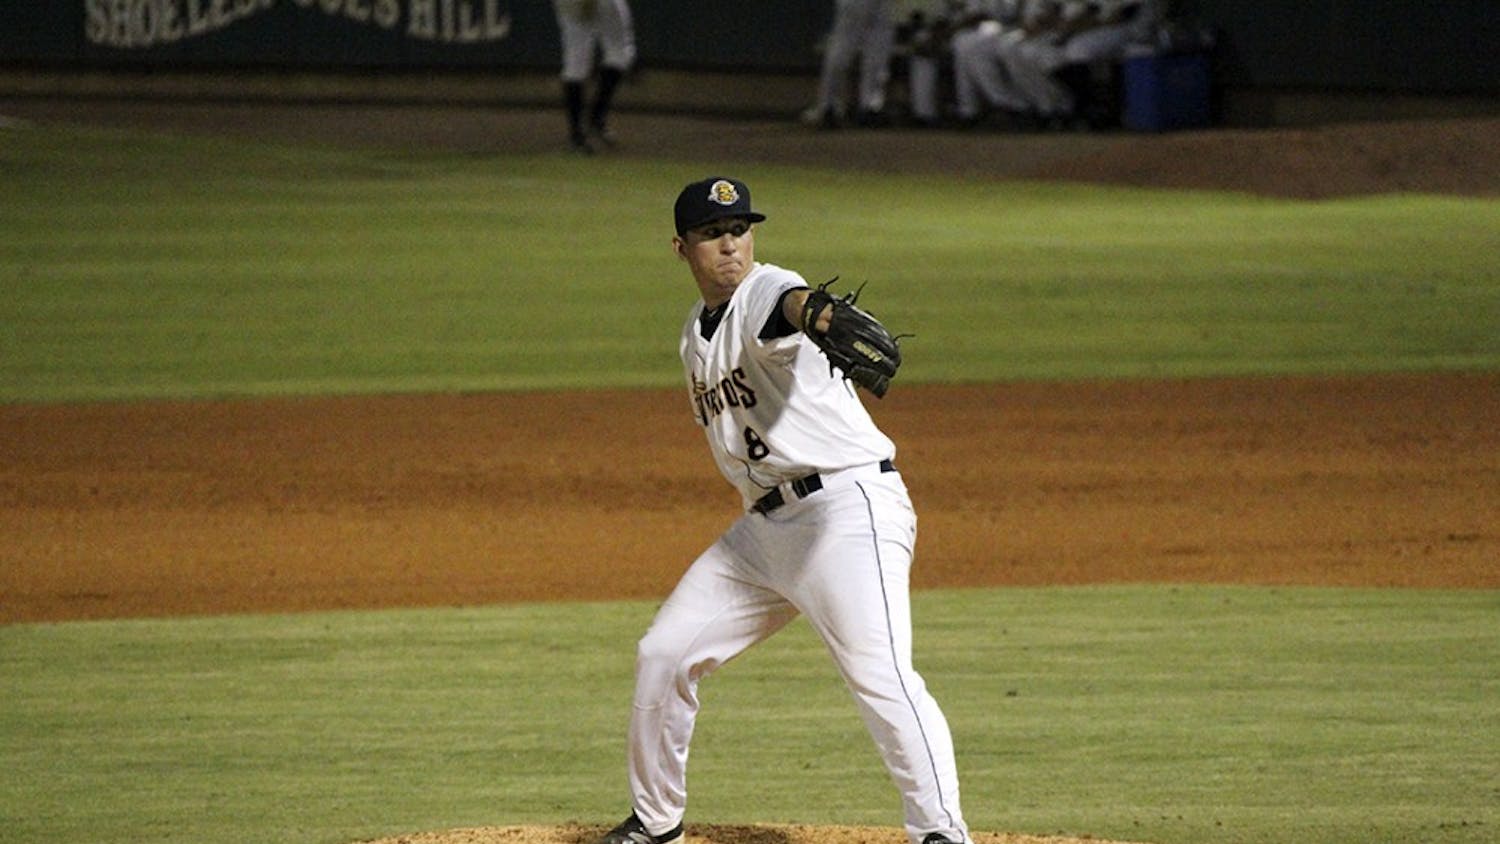 Widener was drafted in the 12th round of the MLB Draft by the New York Yankees and now plays for their A affiliate team, the Charleston RiverDogs.